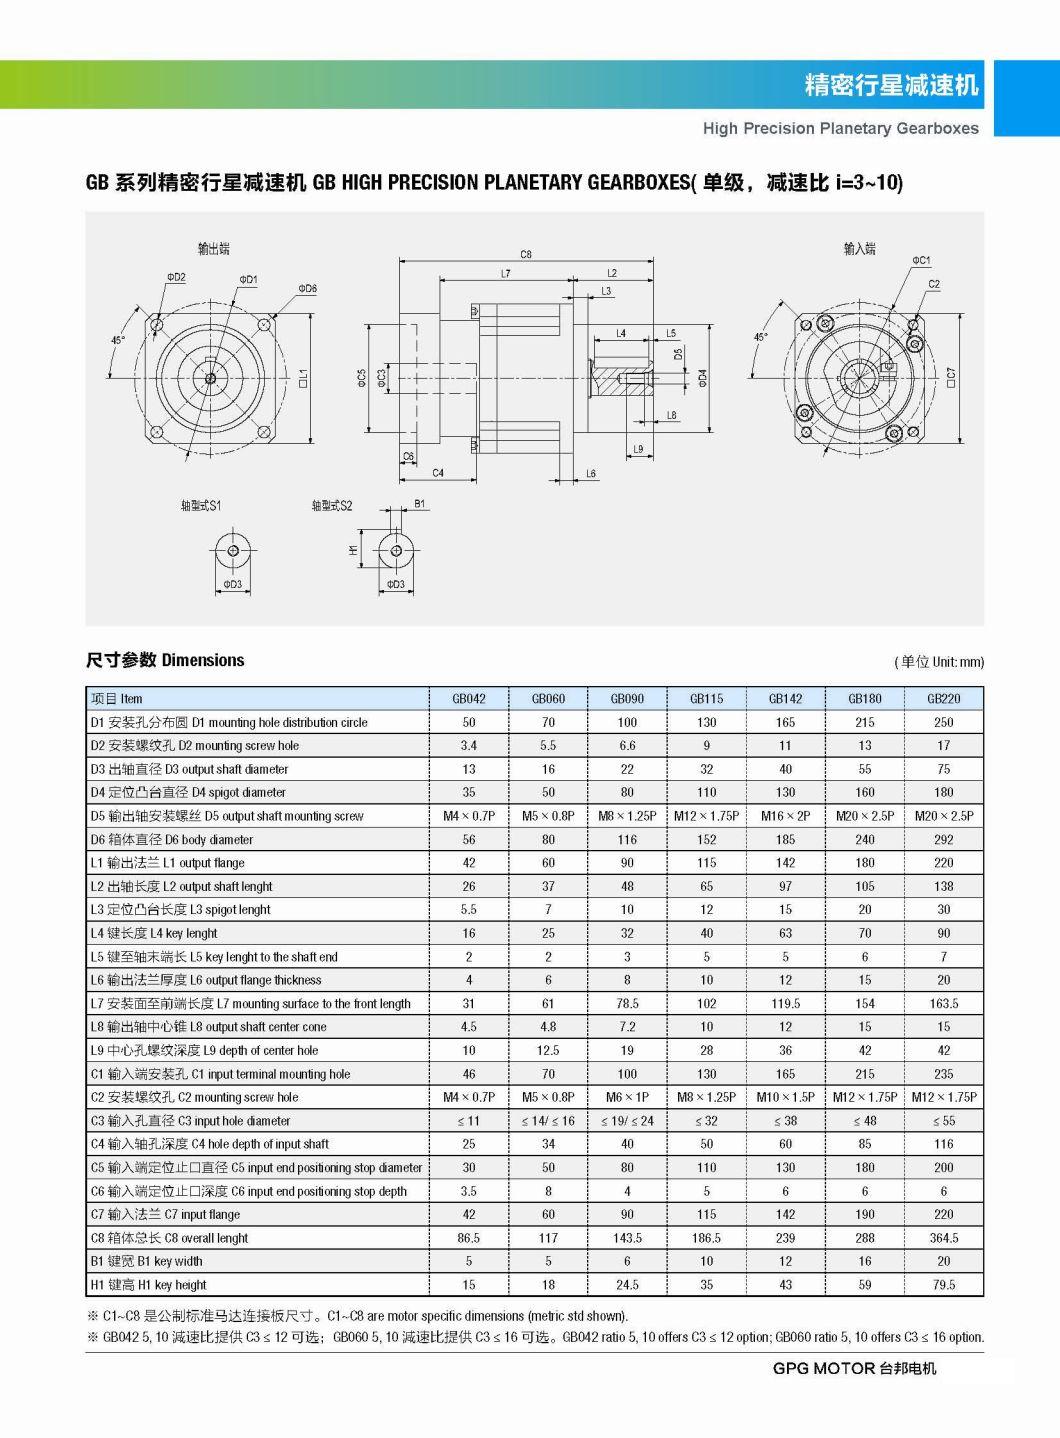 Planetary Gearbox, Gearbox, Brushless Motor Match with Planetary Gearbox